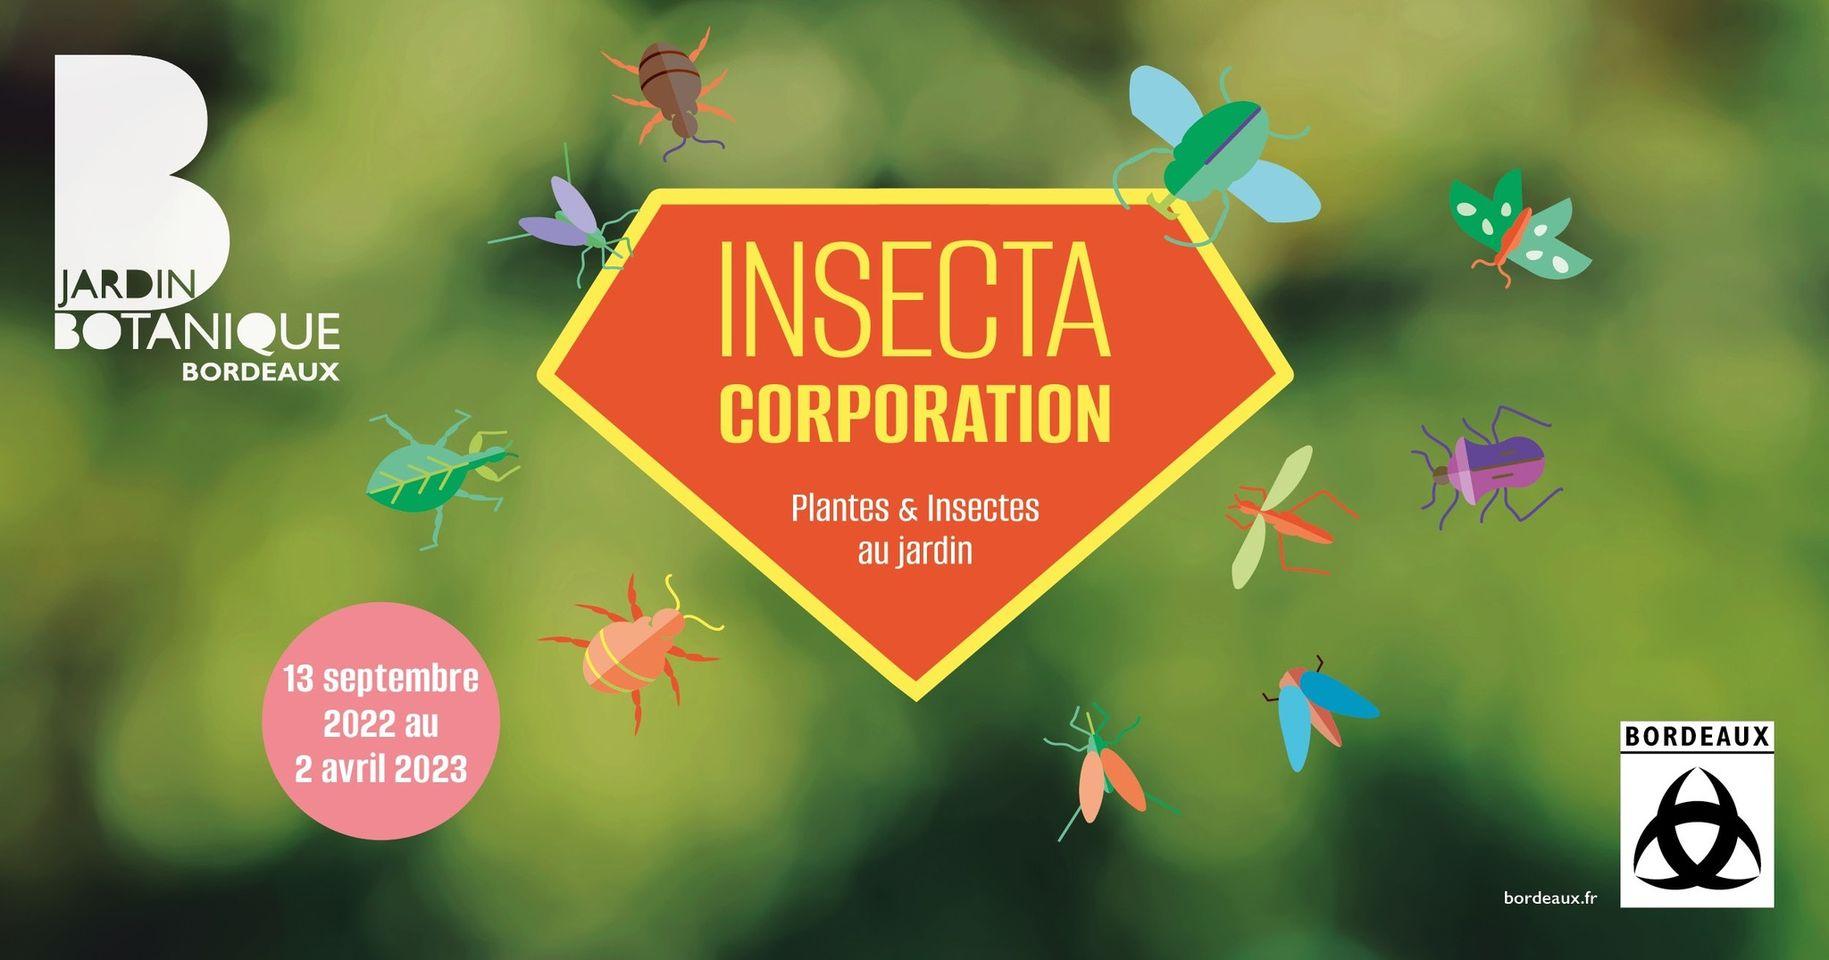 Expo-Bordeaux-Insecta-Corporation-2022-2023